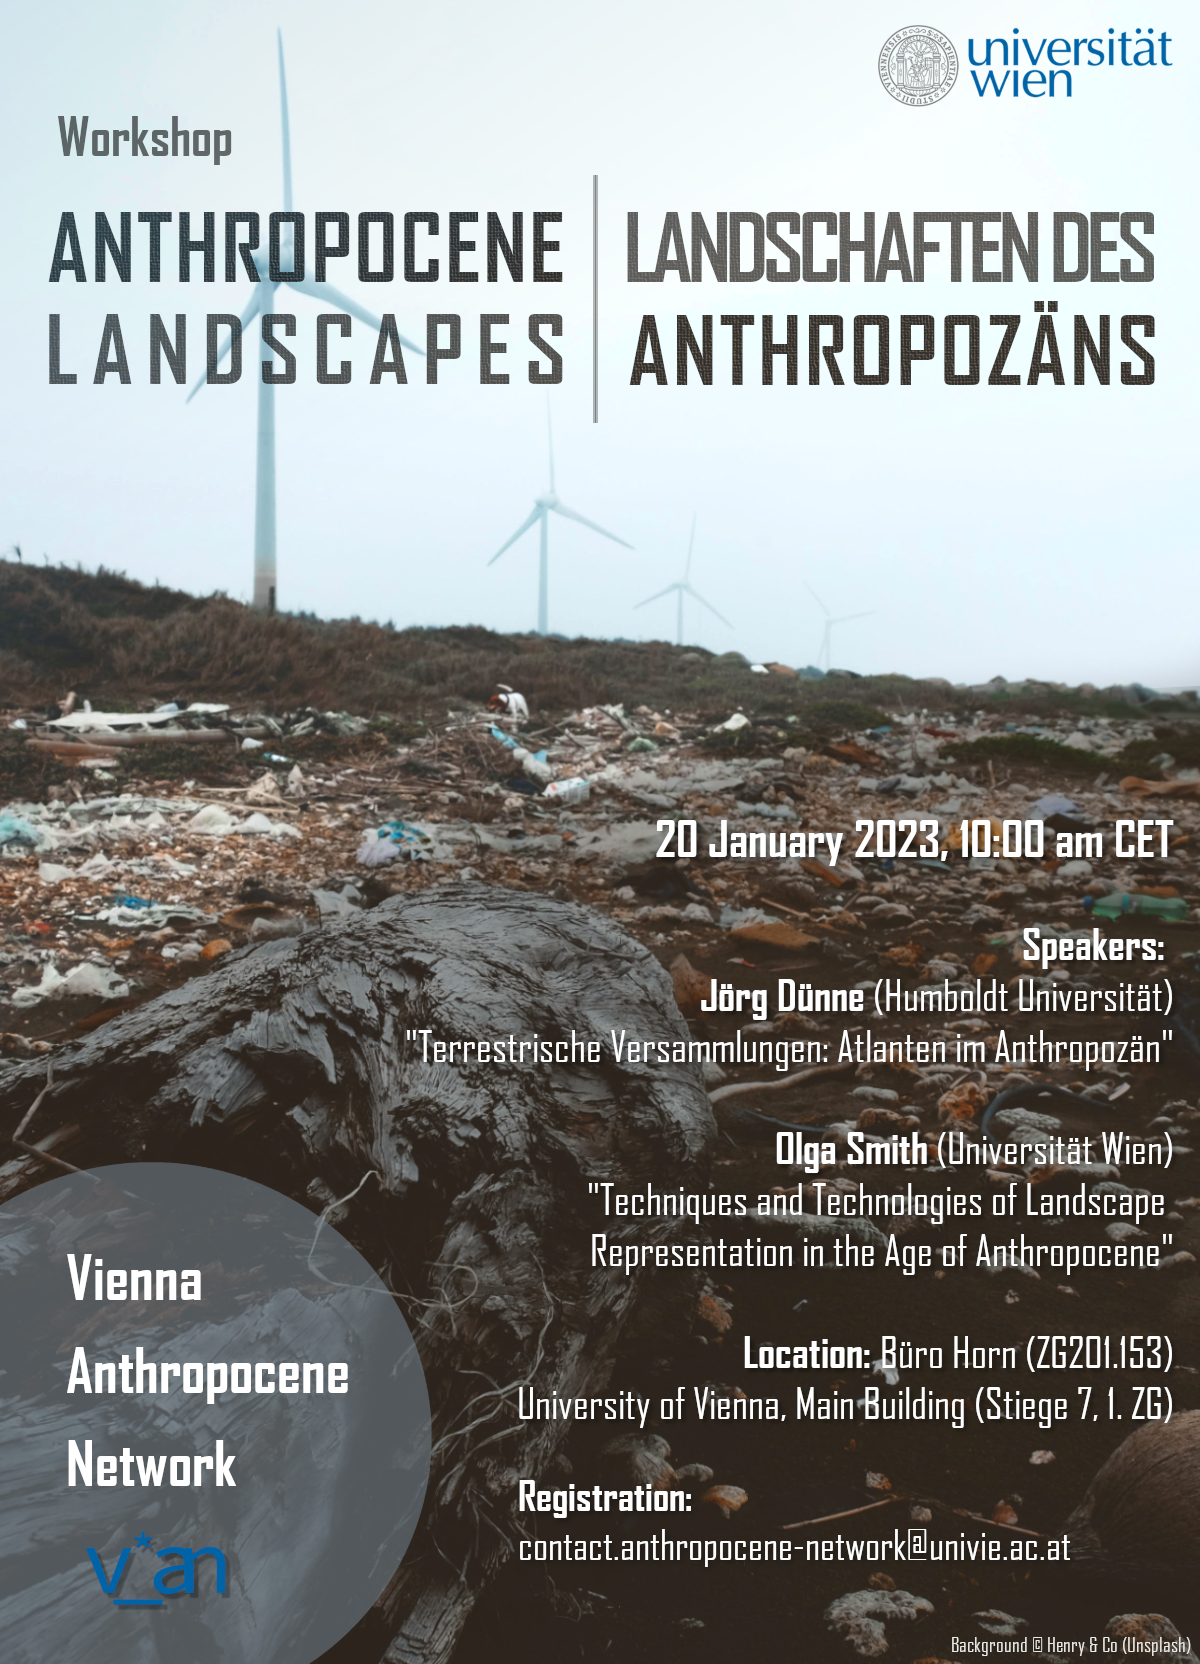 Poster for the workshop "Anthropocene Landscapes" (image showing a plastic-polluted stretch of land in the foreground and wind turbines in the background)